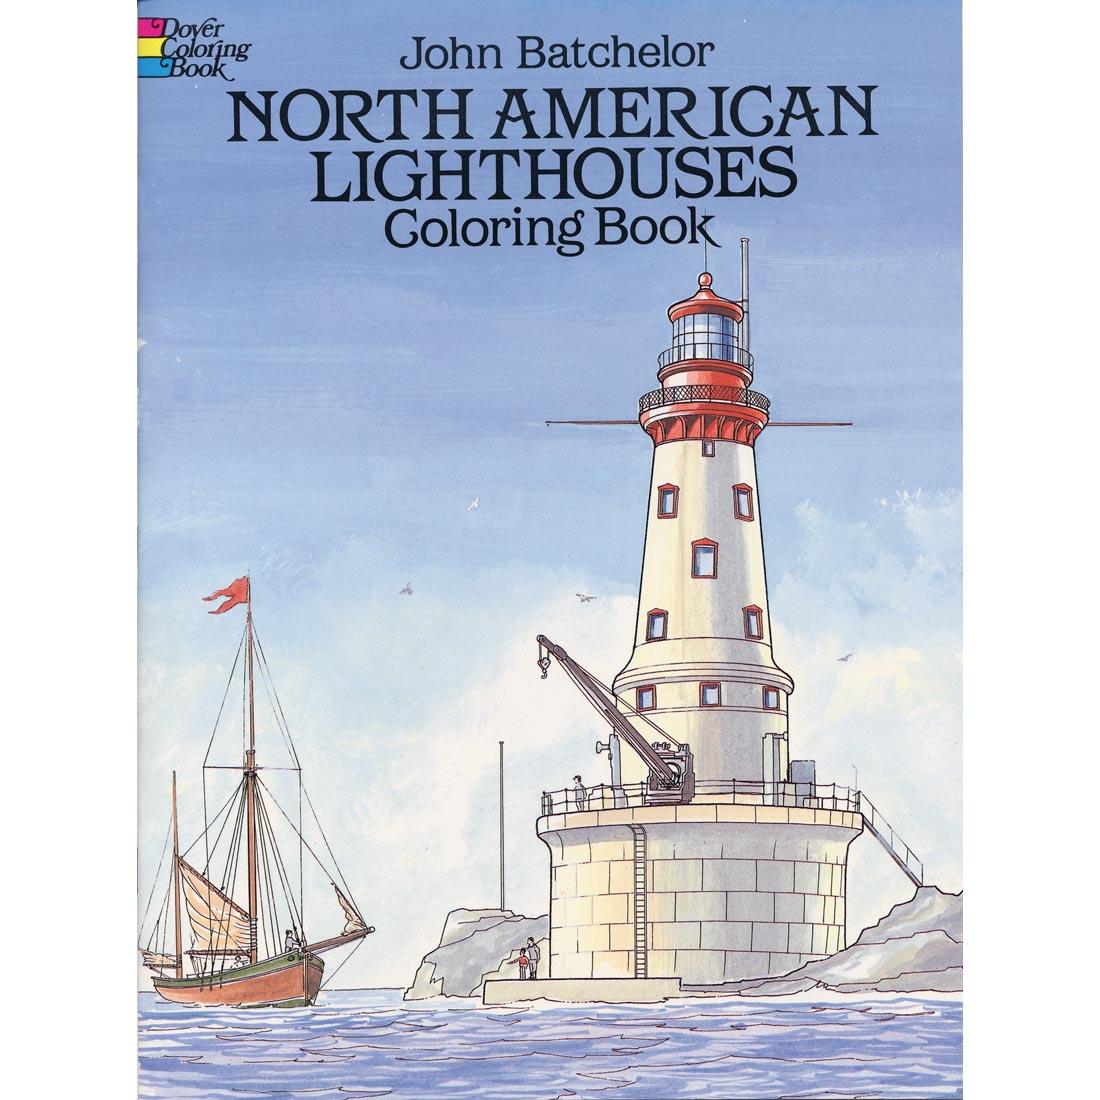 North American Lighthouses Coloring Book by Dover